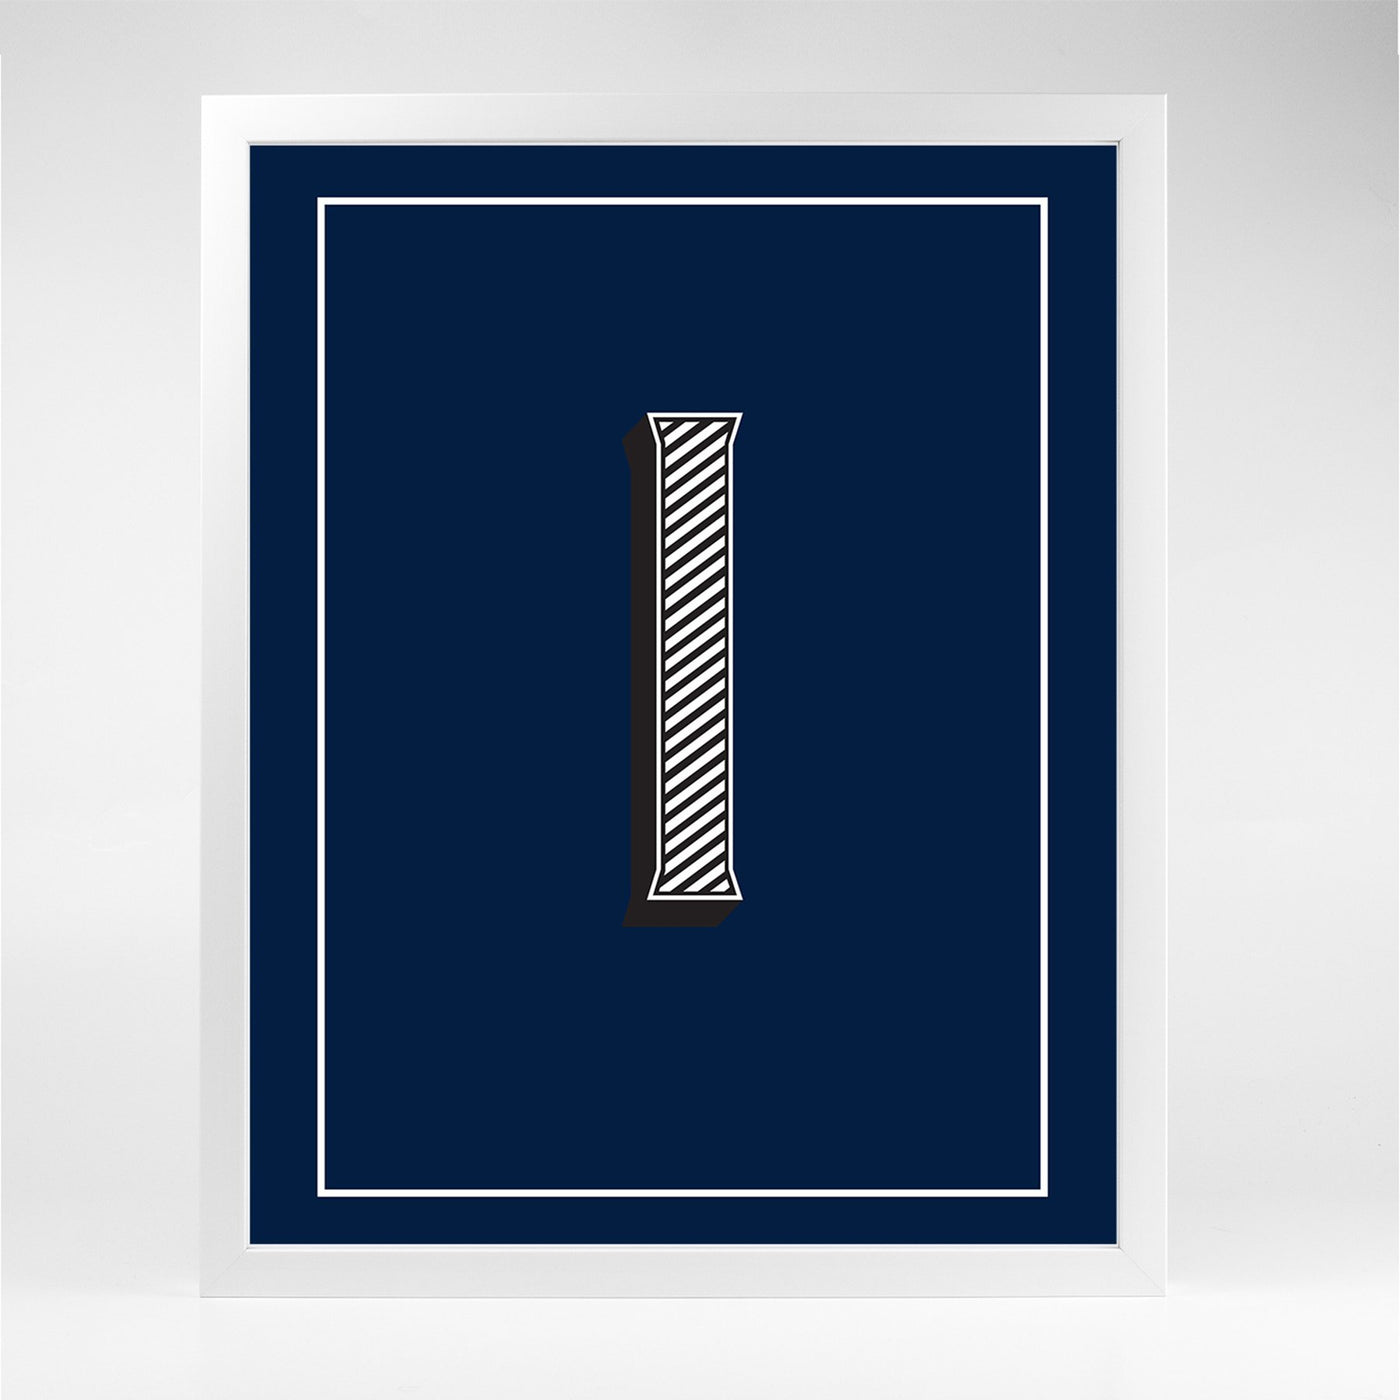 Gallery Prints I The Letter Series Katie Kime